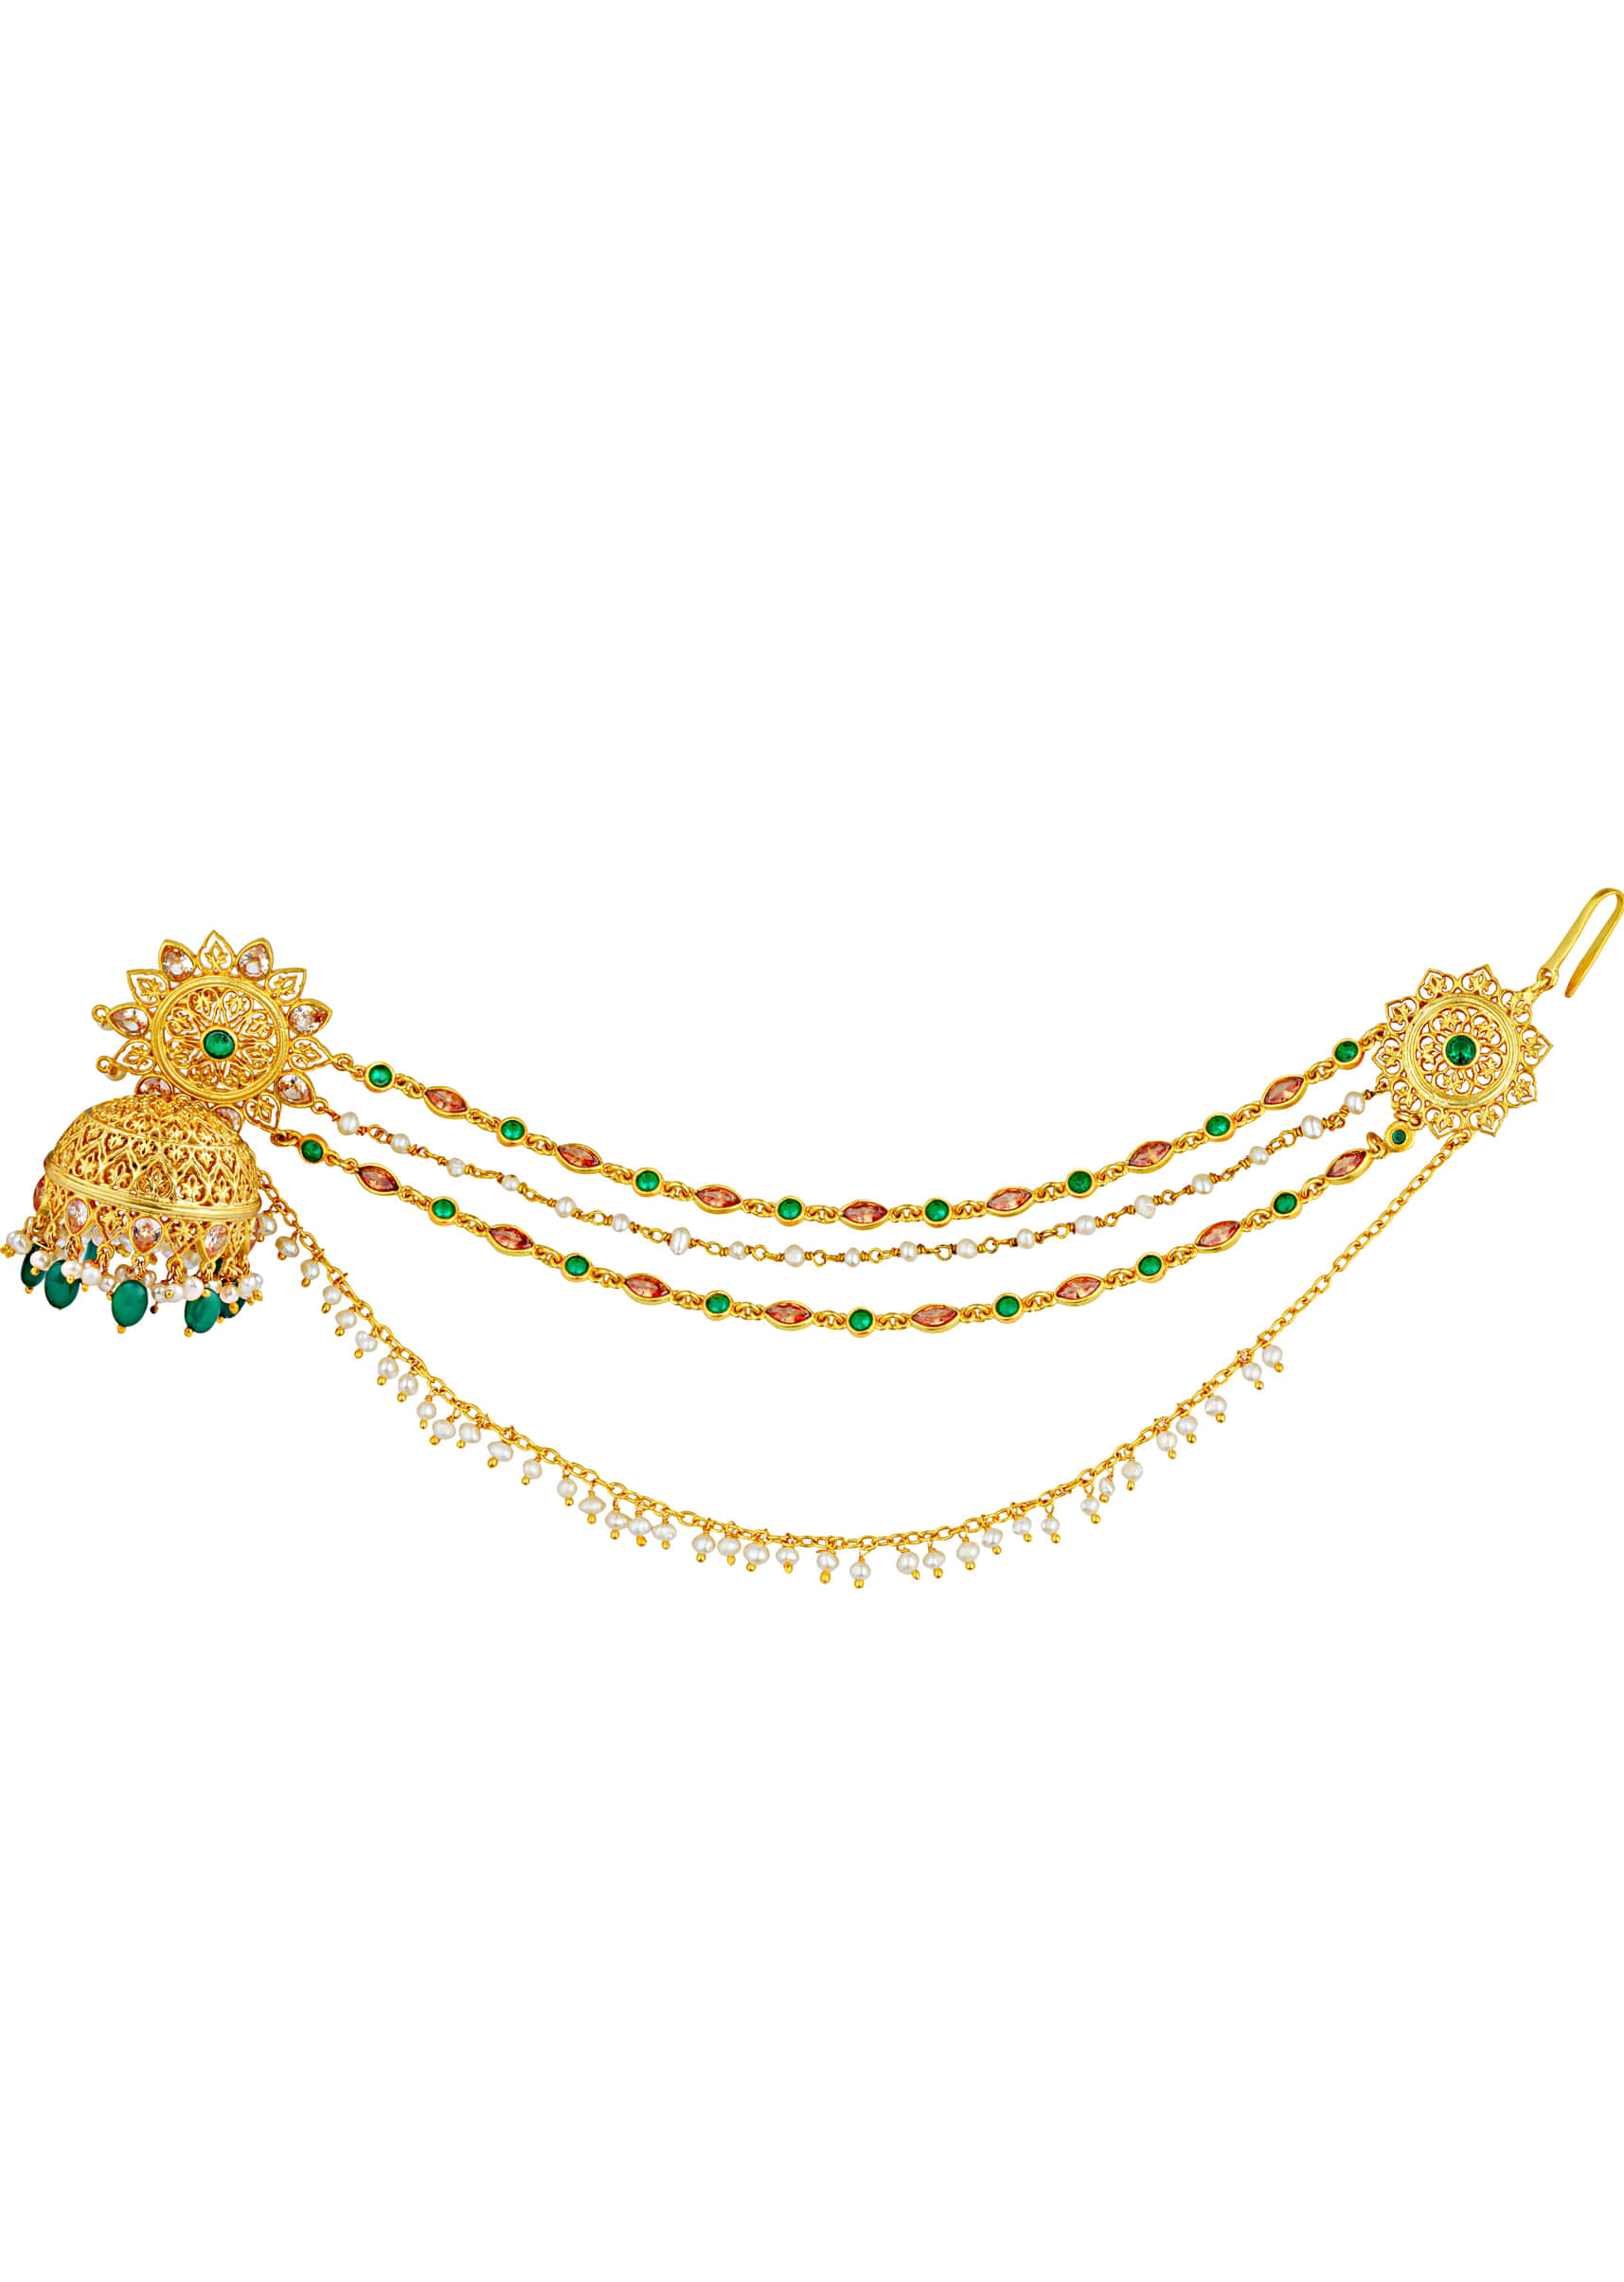 Gold Plated Jhumkas With Pearls And Green Onyx Beads And String Detailing By Zariin